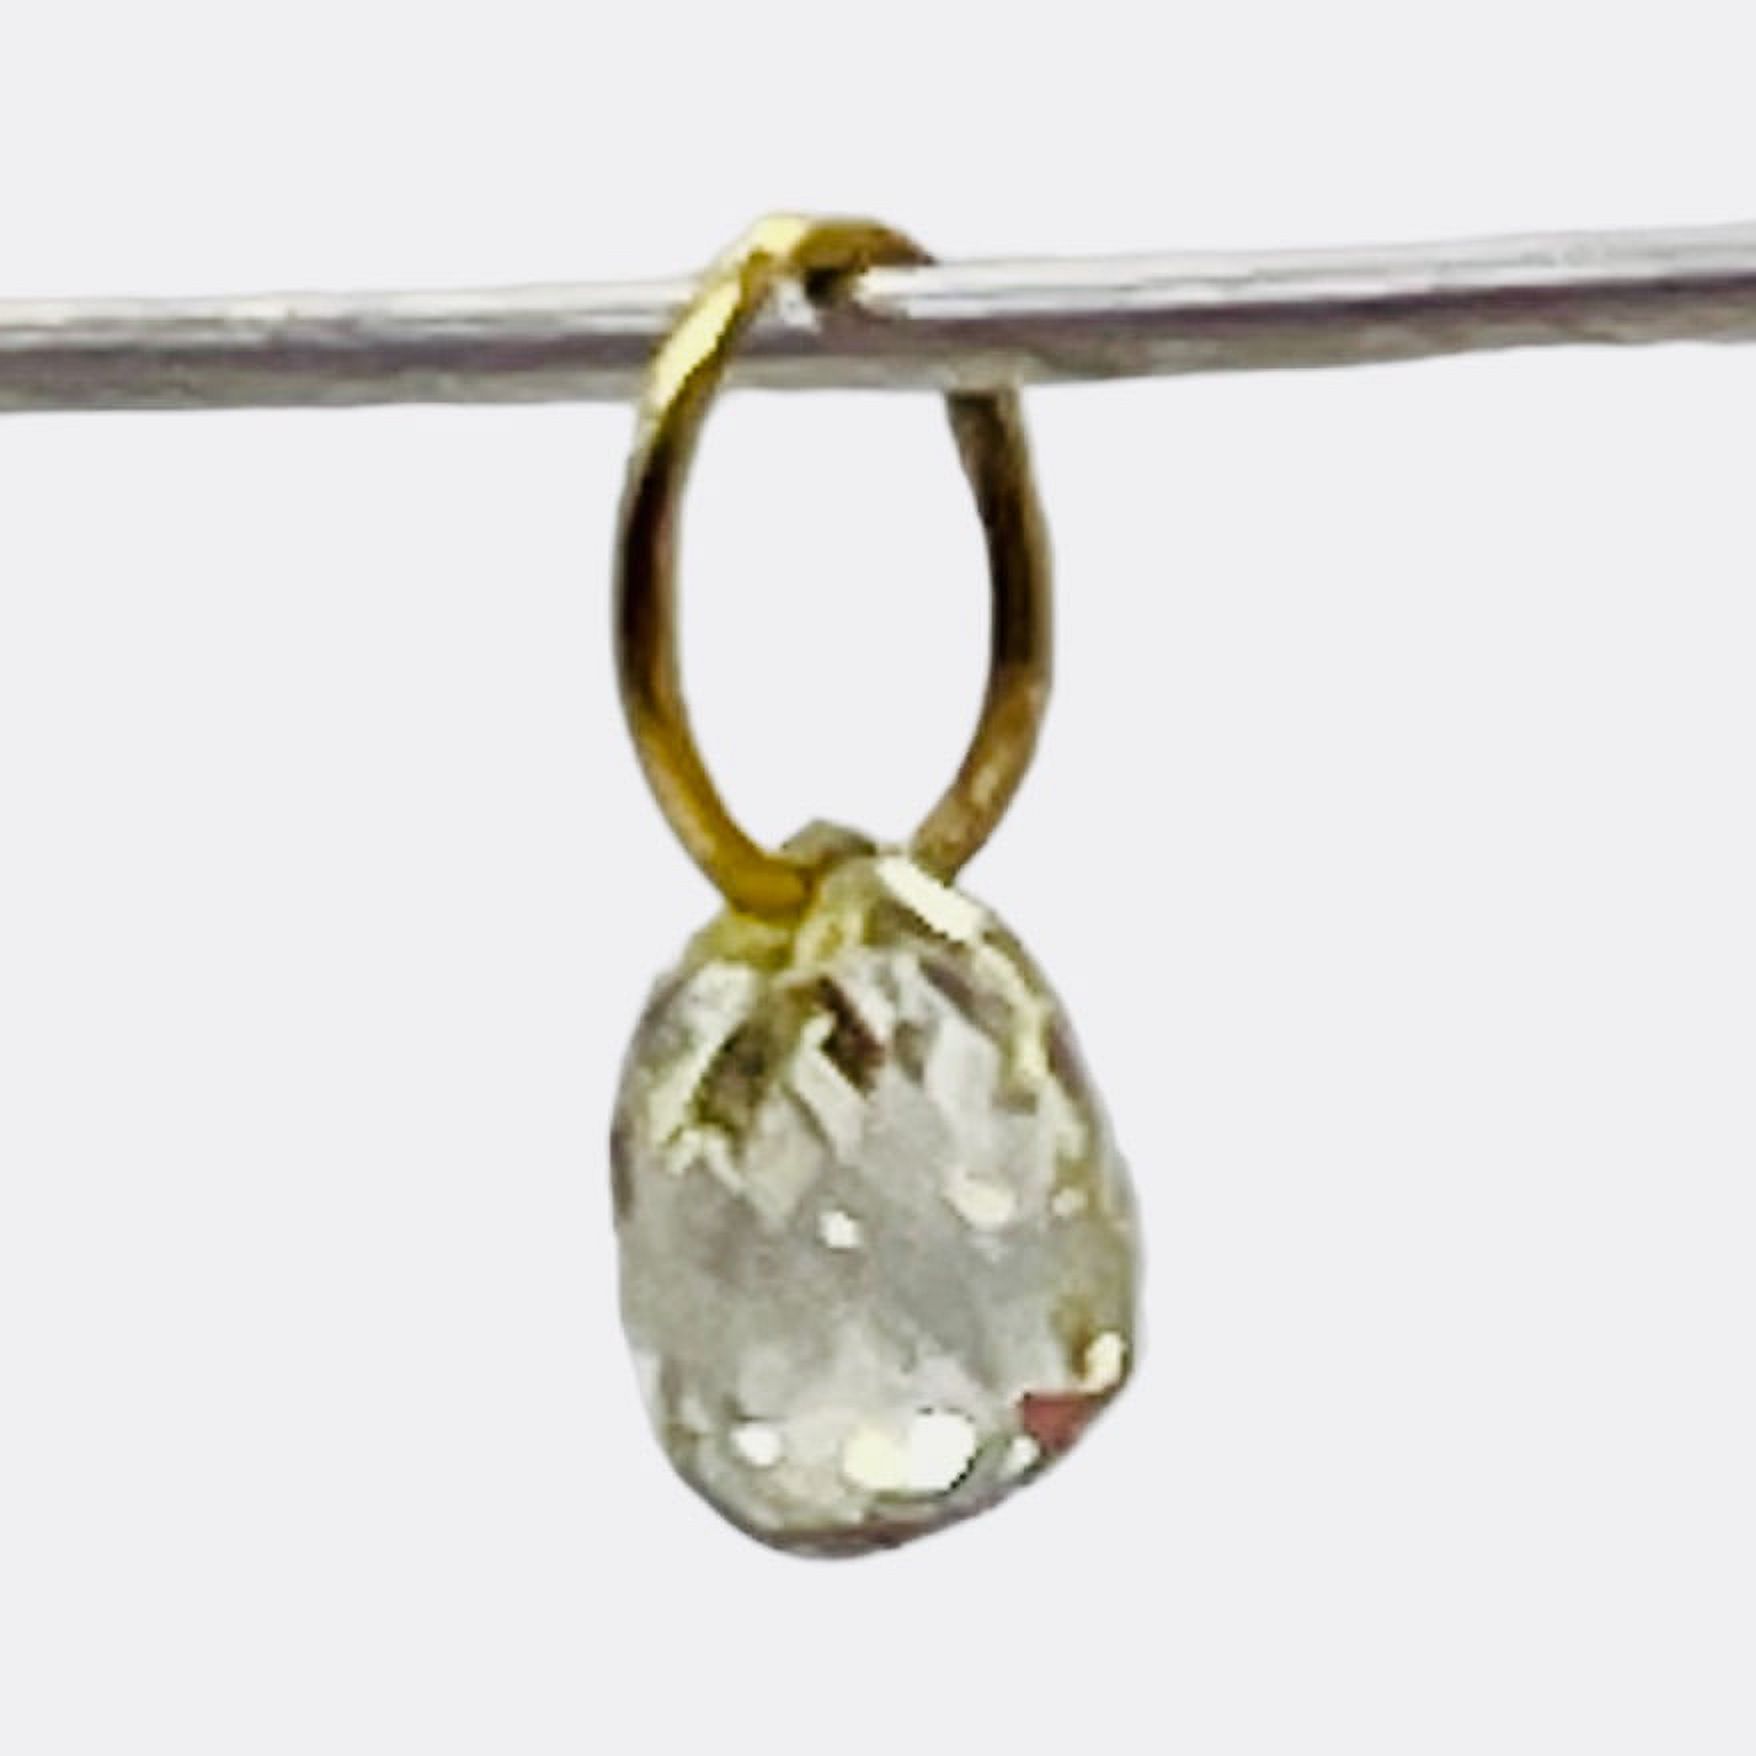 0.28cts Natural Canary Diamond 18K Gold Pendant | 3.25x2.5x2.25mm | - image 1 of 12